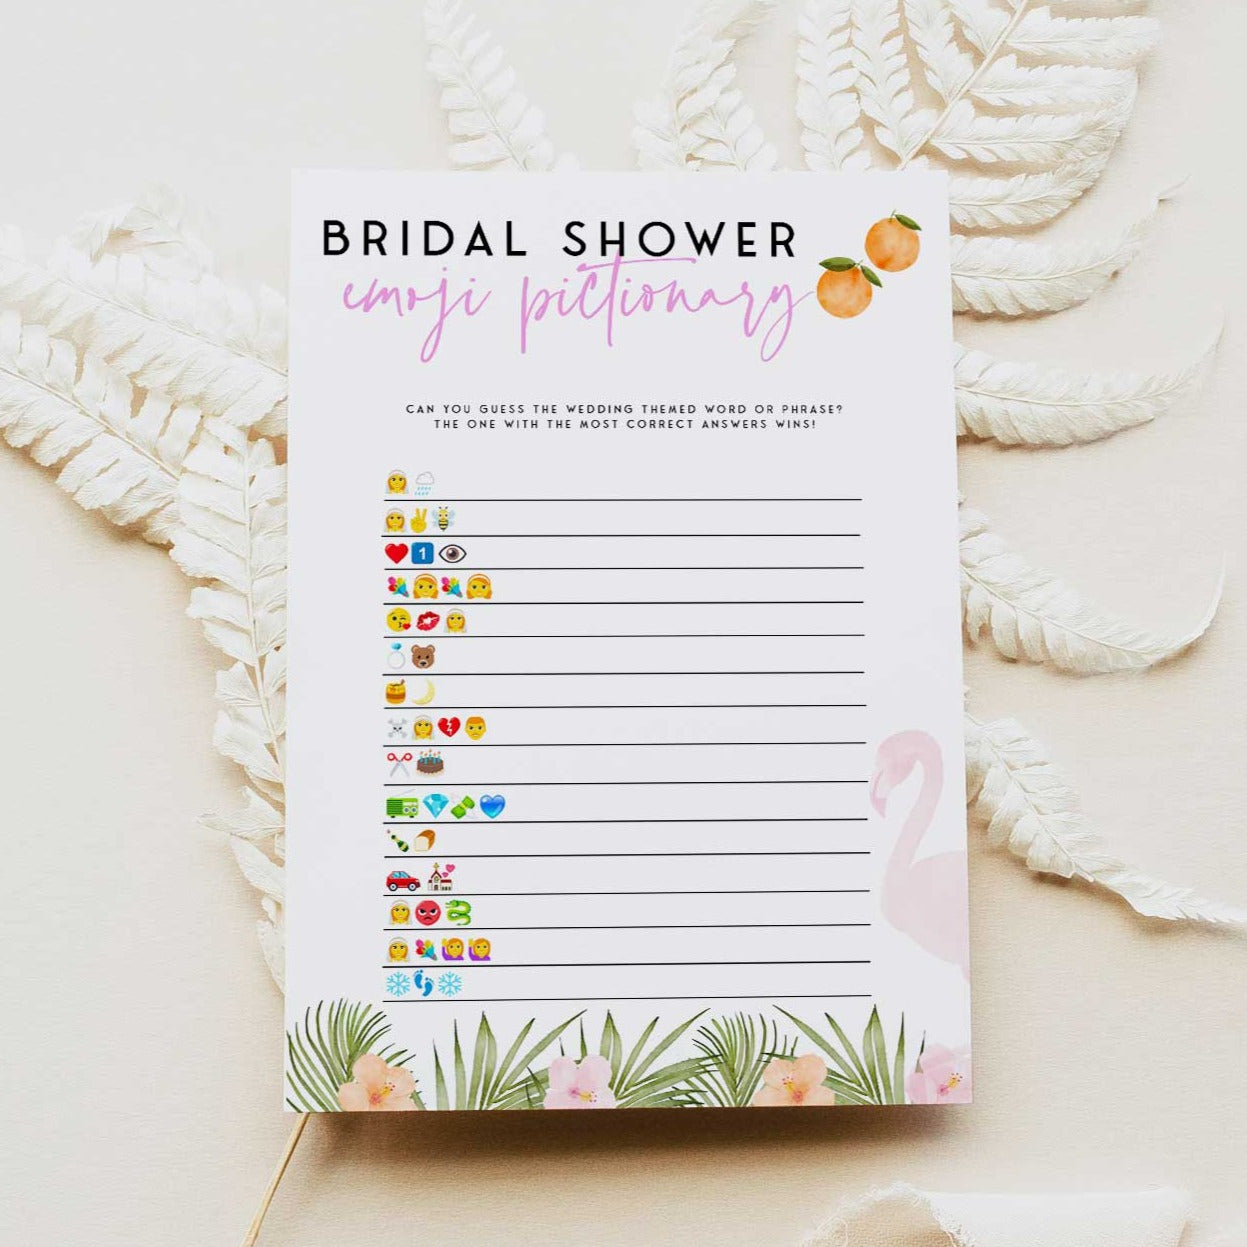 Fully editable and printable bridal emoji pictionary game with a miami design. Perfect for a miami, Bachelorette themed party